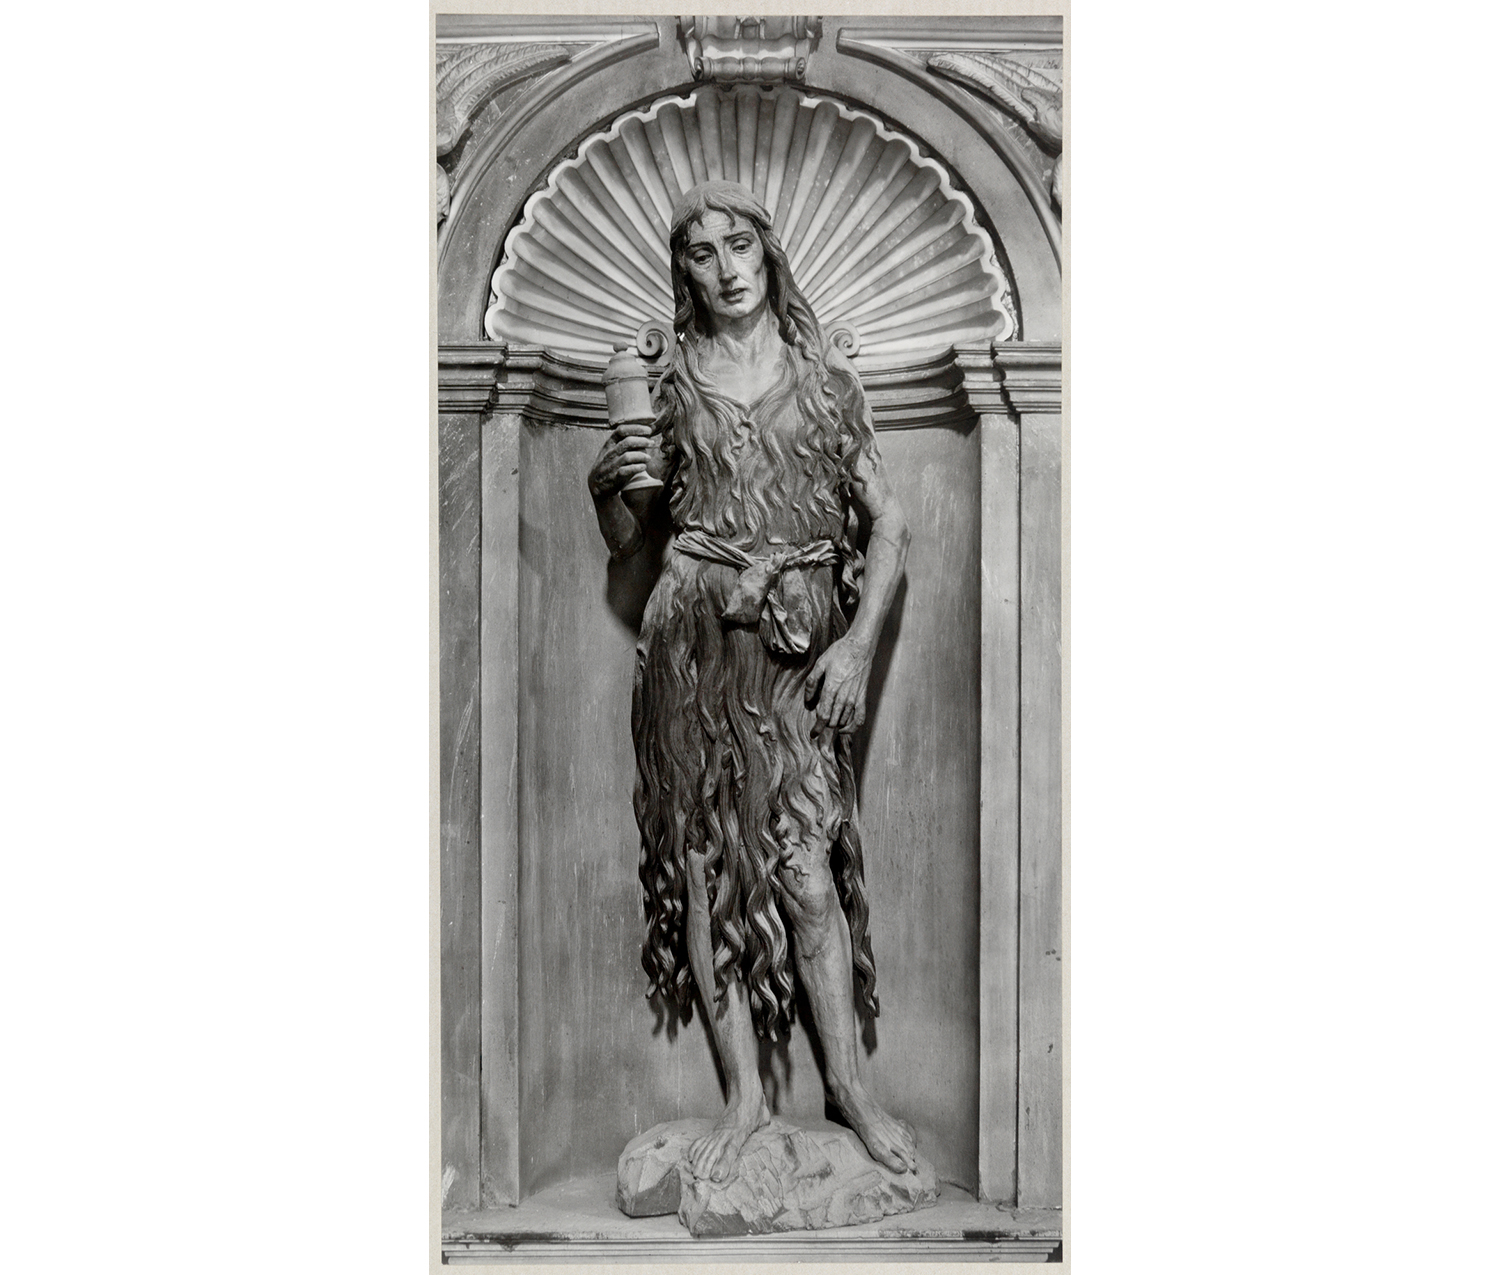 sculpture of a woman wearing a dress and holding a candle in her proper right hand, standing underneath an arch